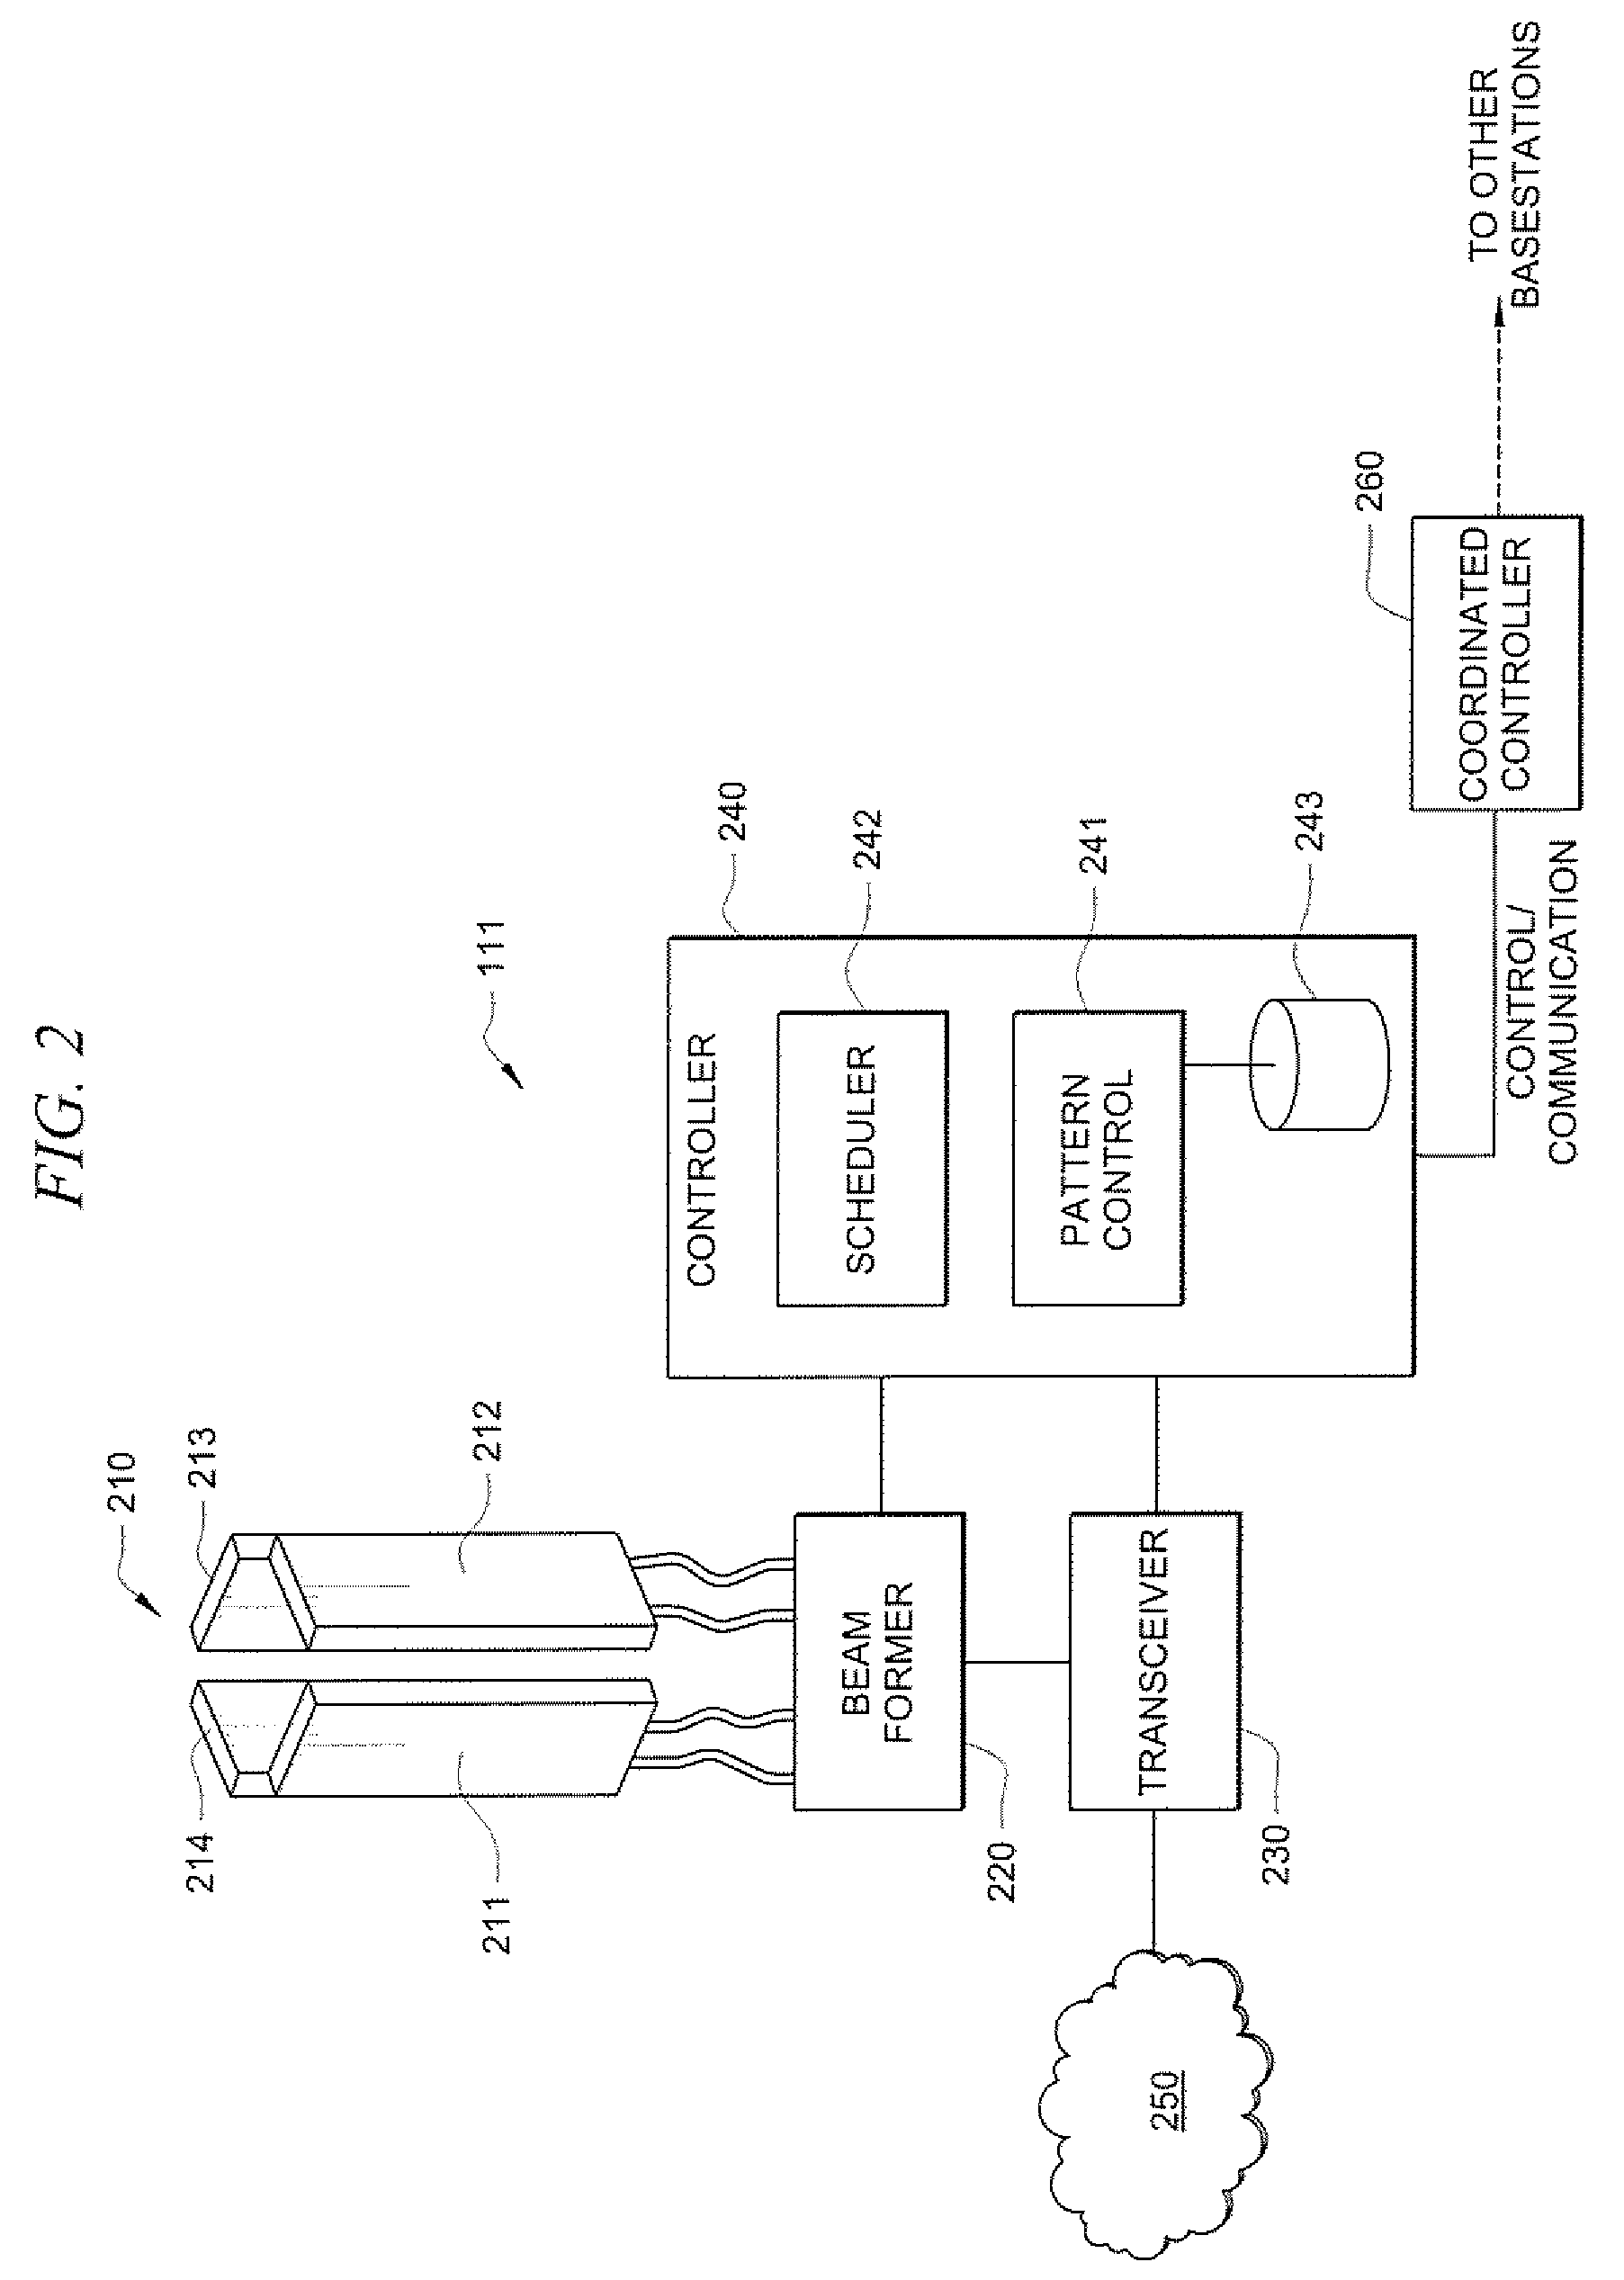 Systems and methods using antenna beam scanning for improved communications